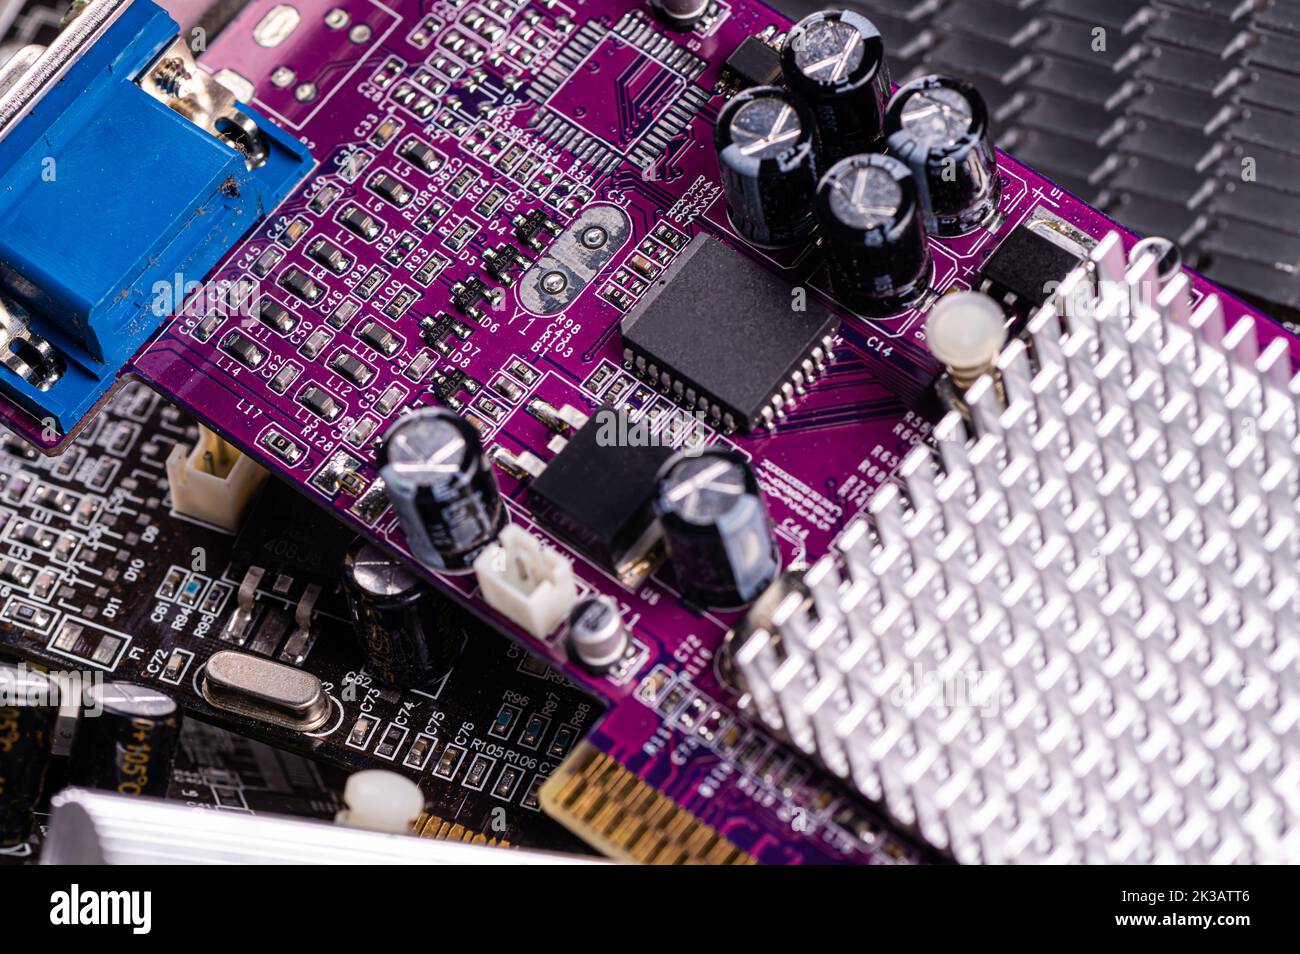 electronic circuit and cooling fin at computer video card, stack with used video cards, close-up Stock Photo